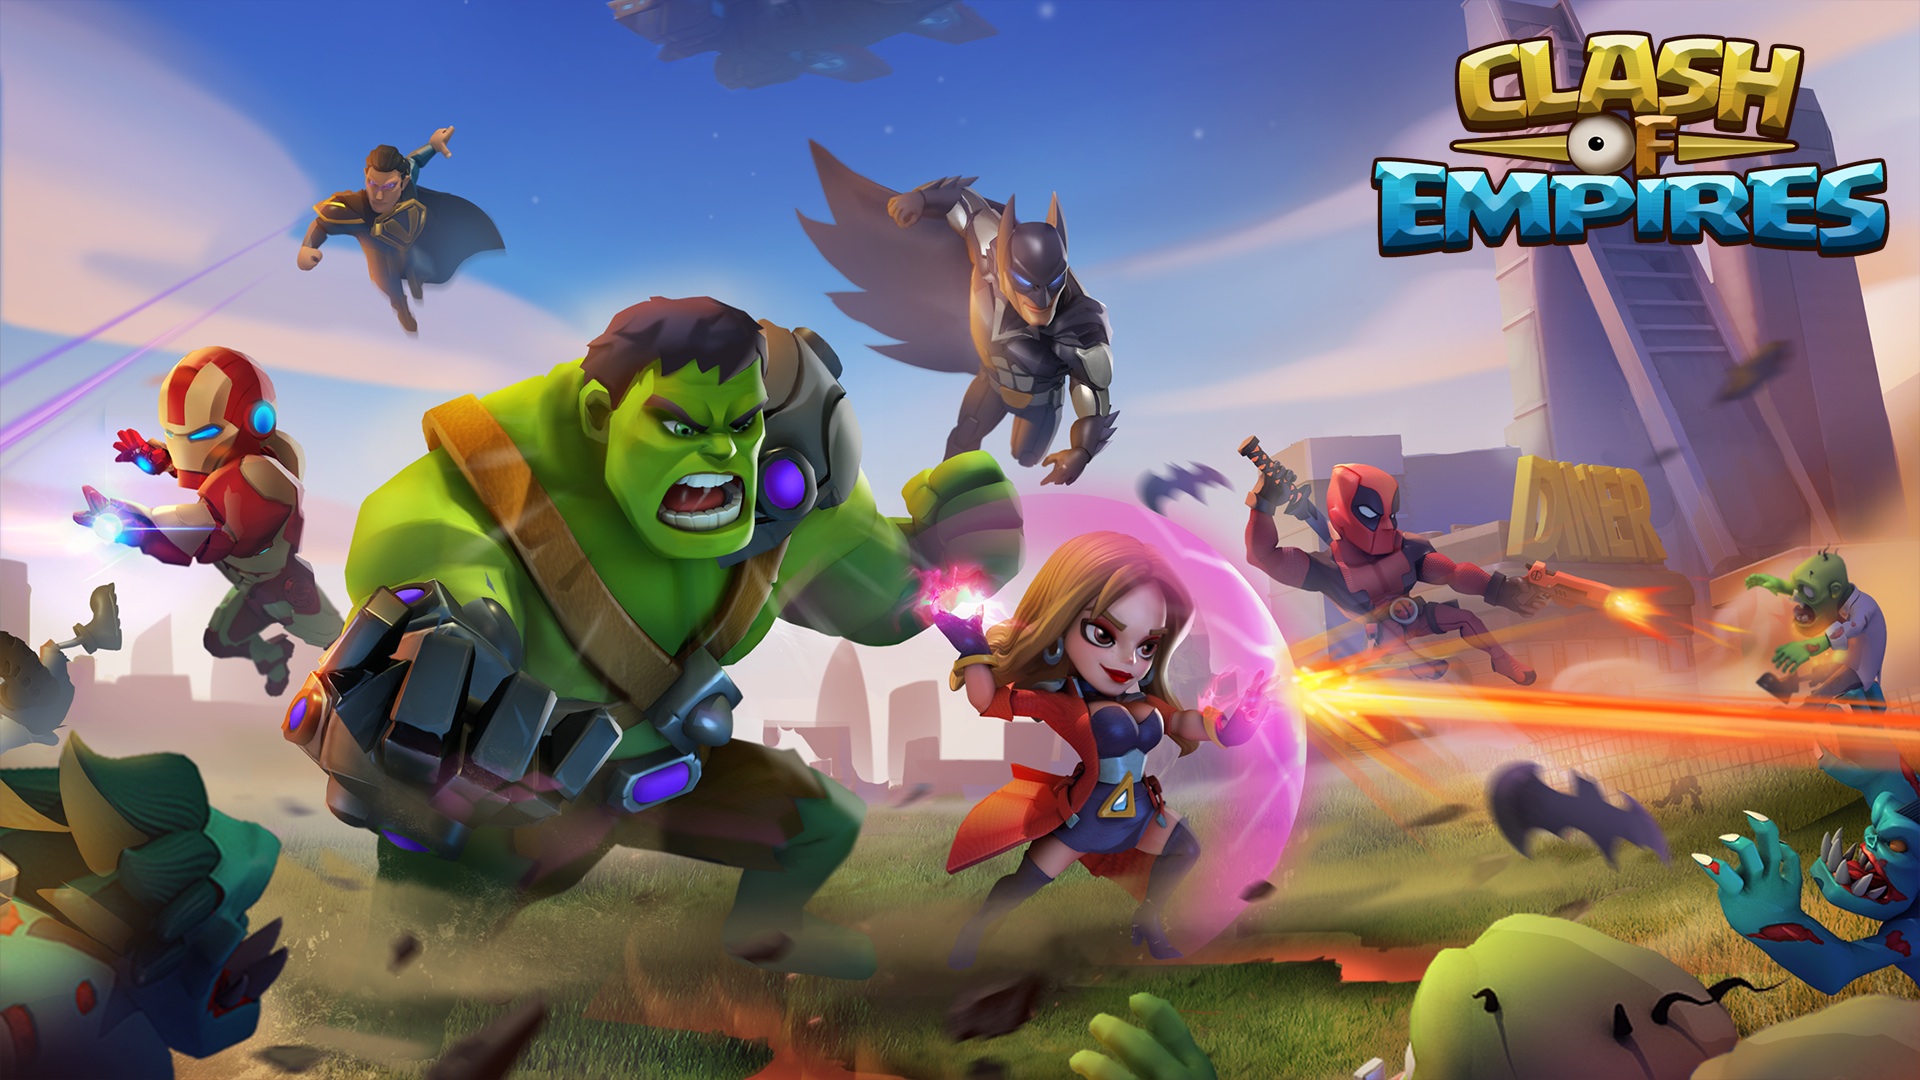 Clash of Empires: Zombies War on mobile is Clash meets zombies meets superheroes